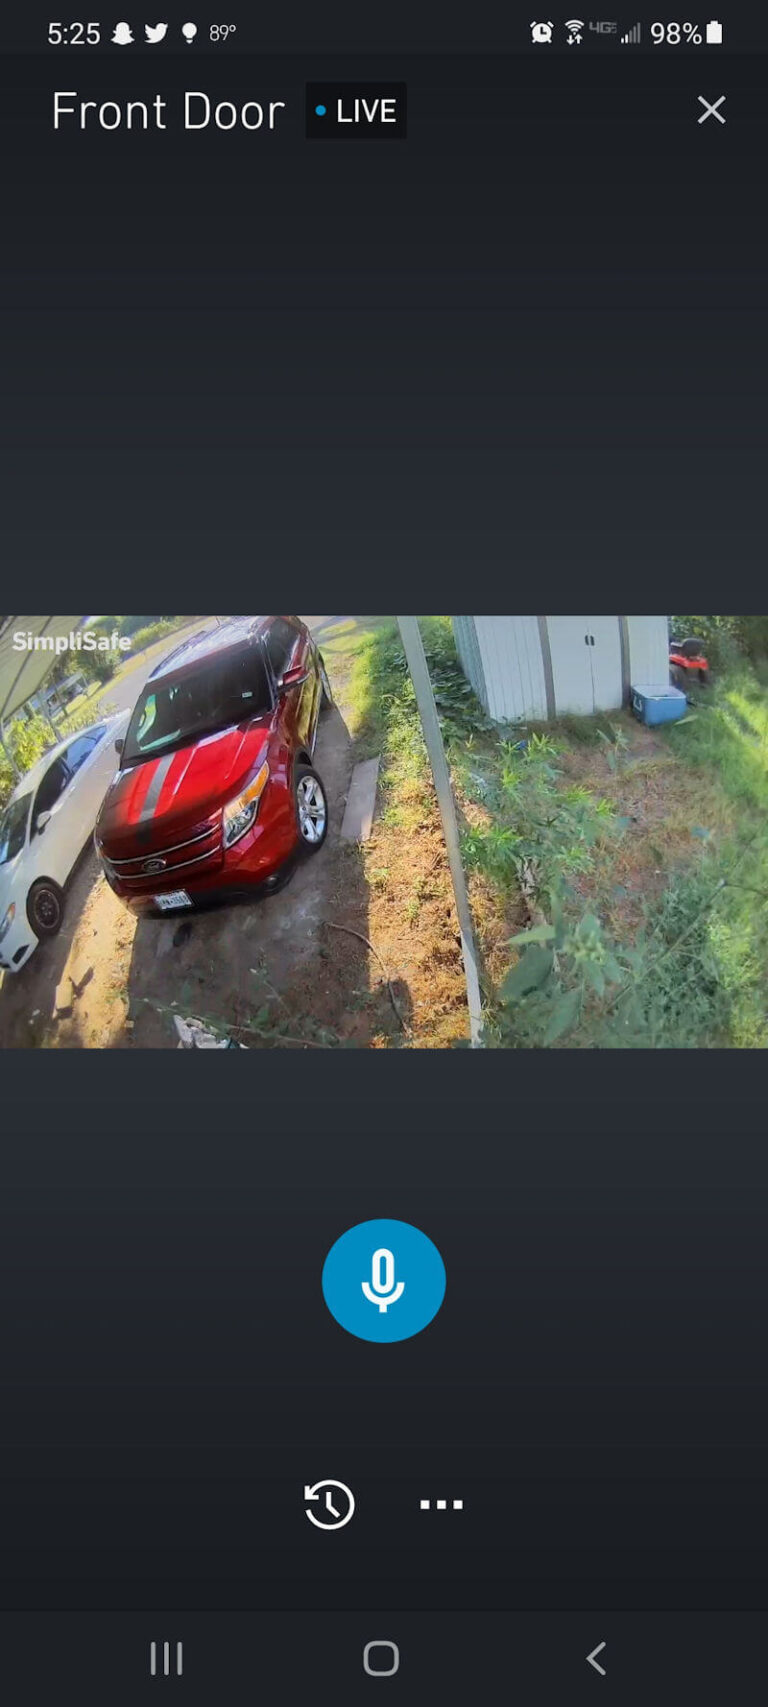 Footage from the SimpliSafe Outdoor Camera is clear and vivid during the day.